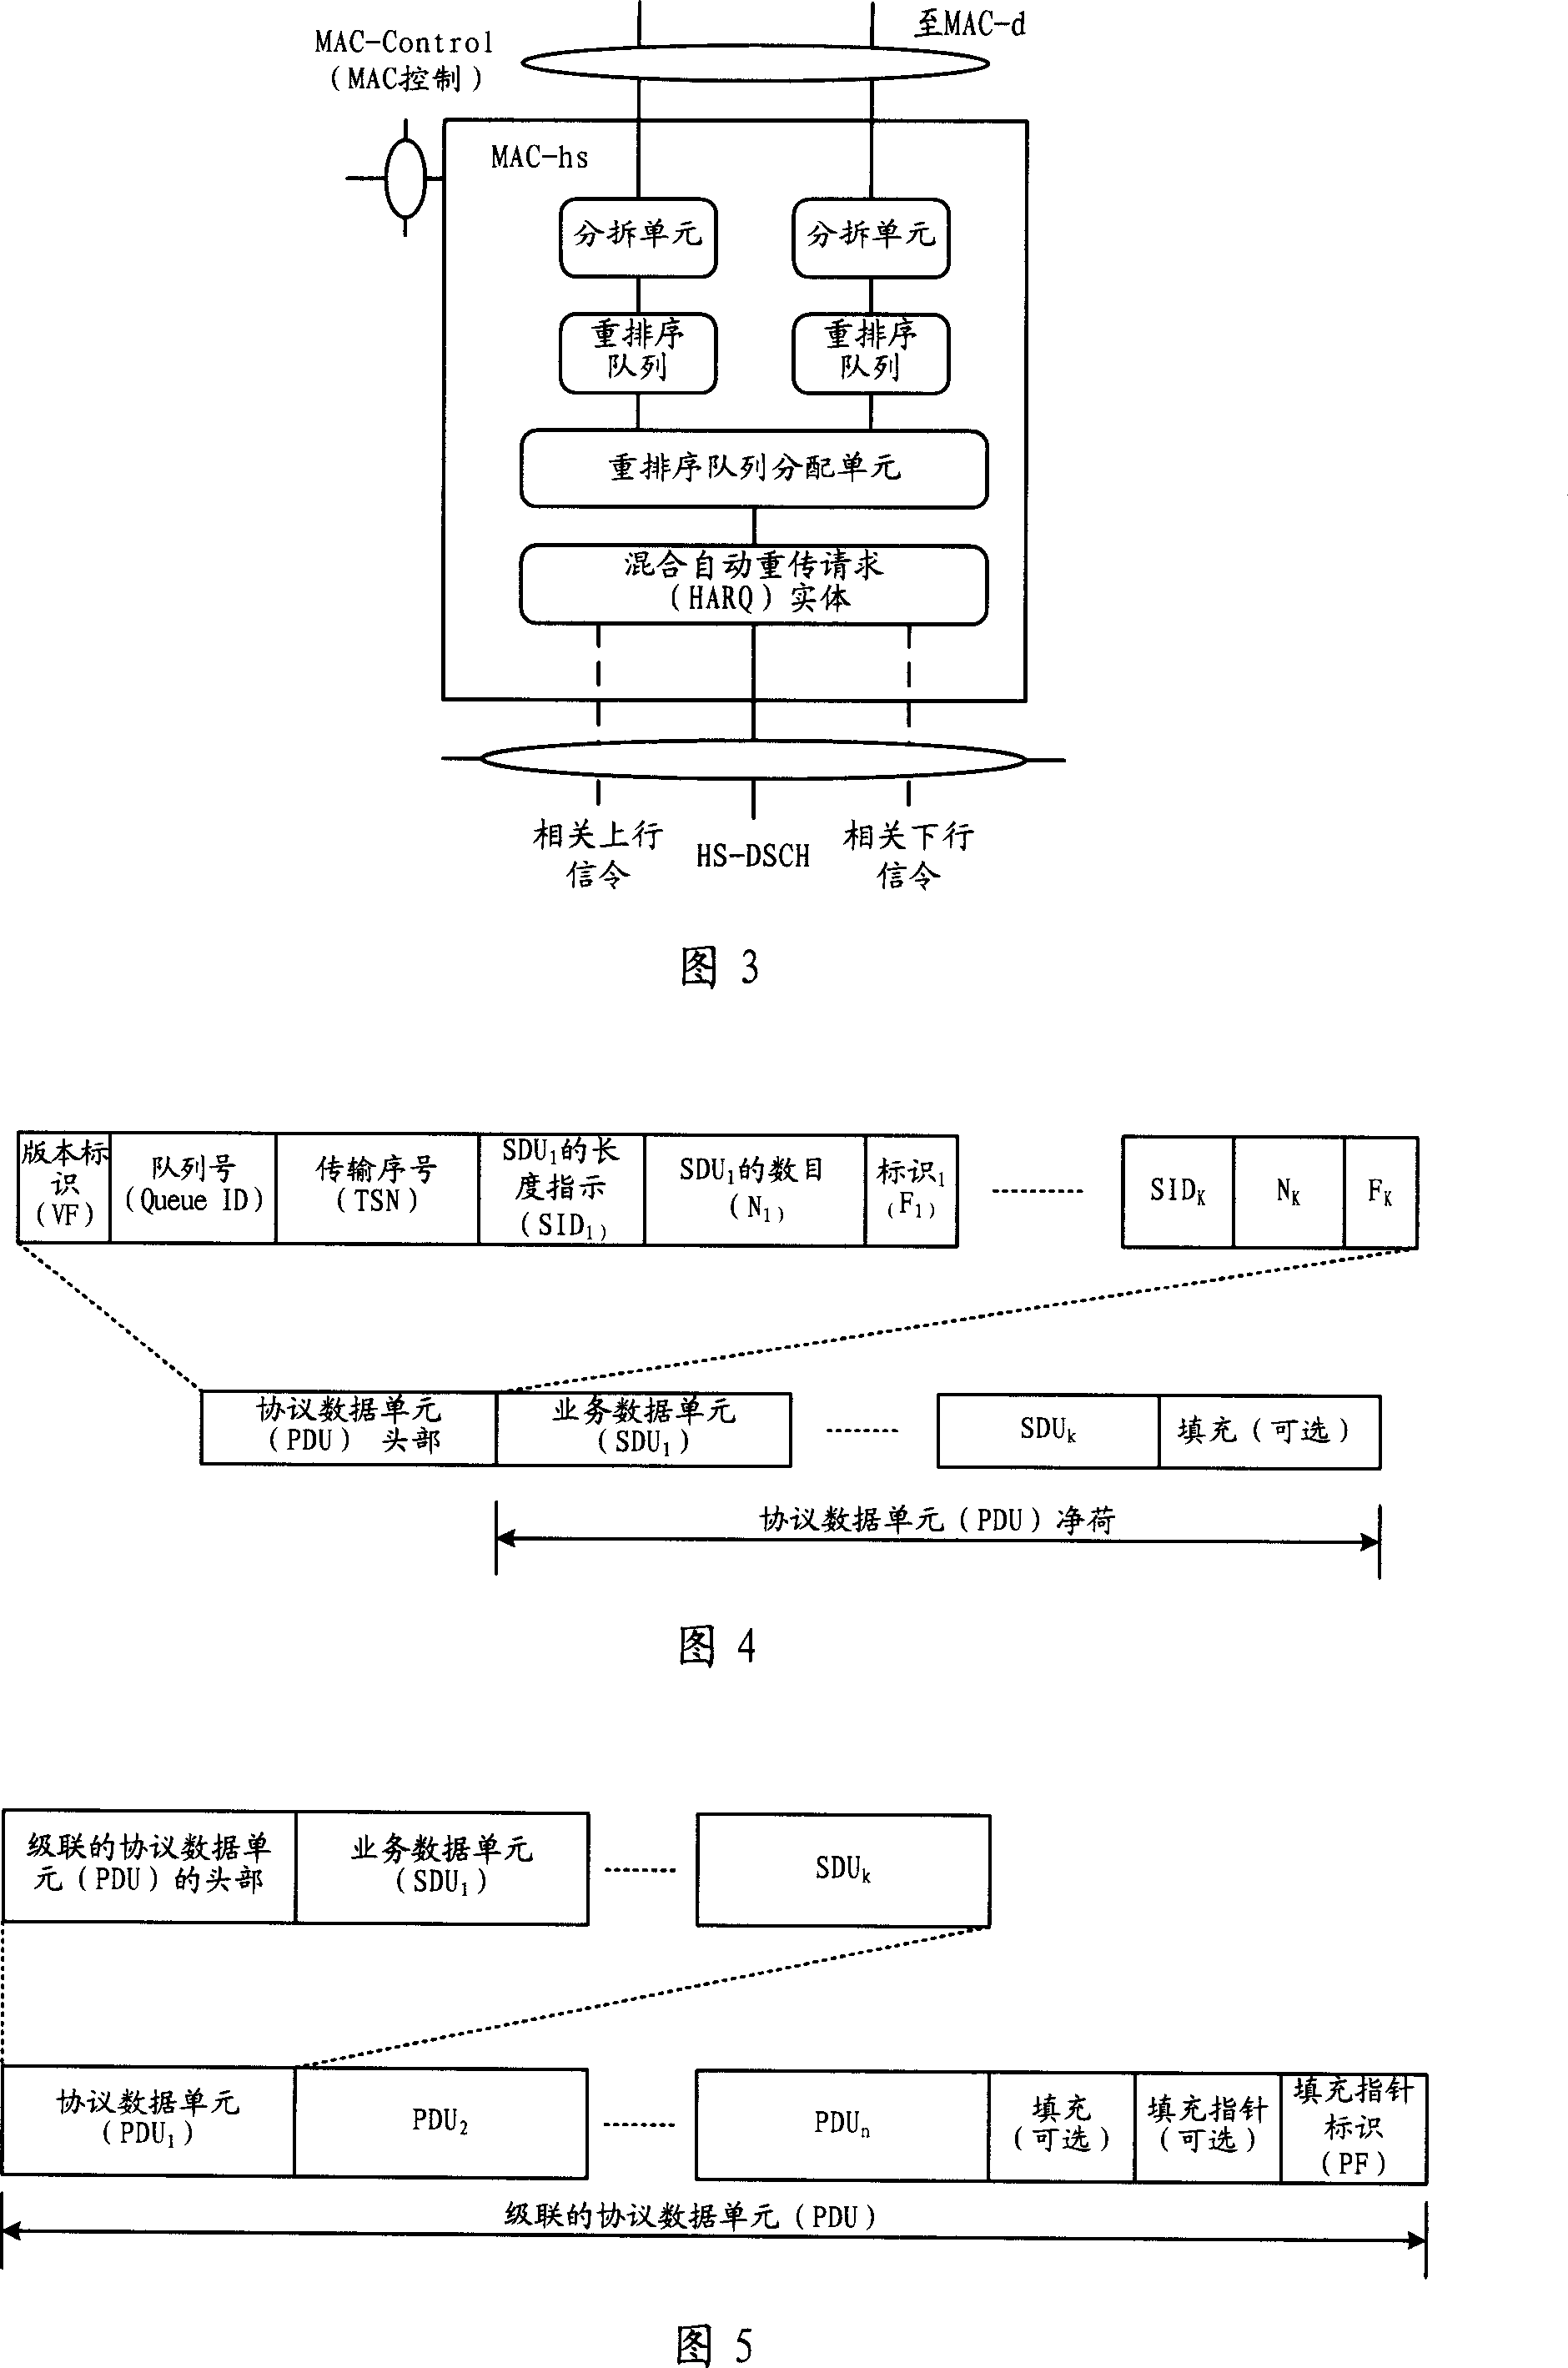 Multi-queue packet data transmission method and its system